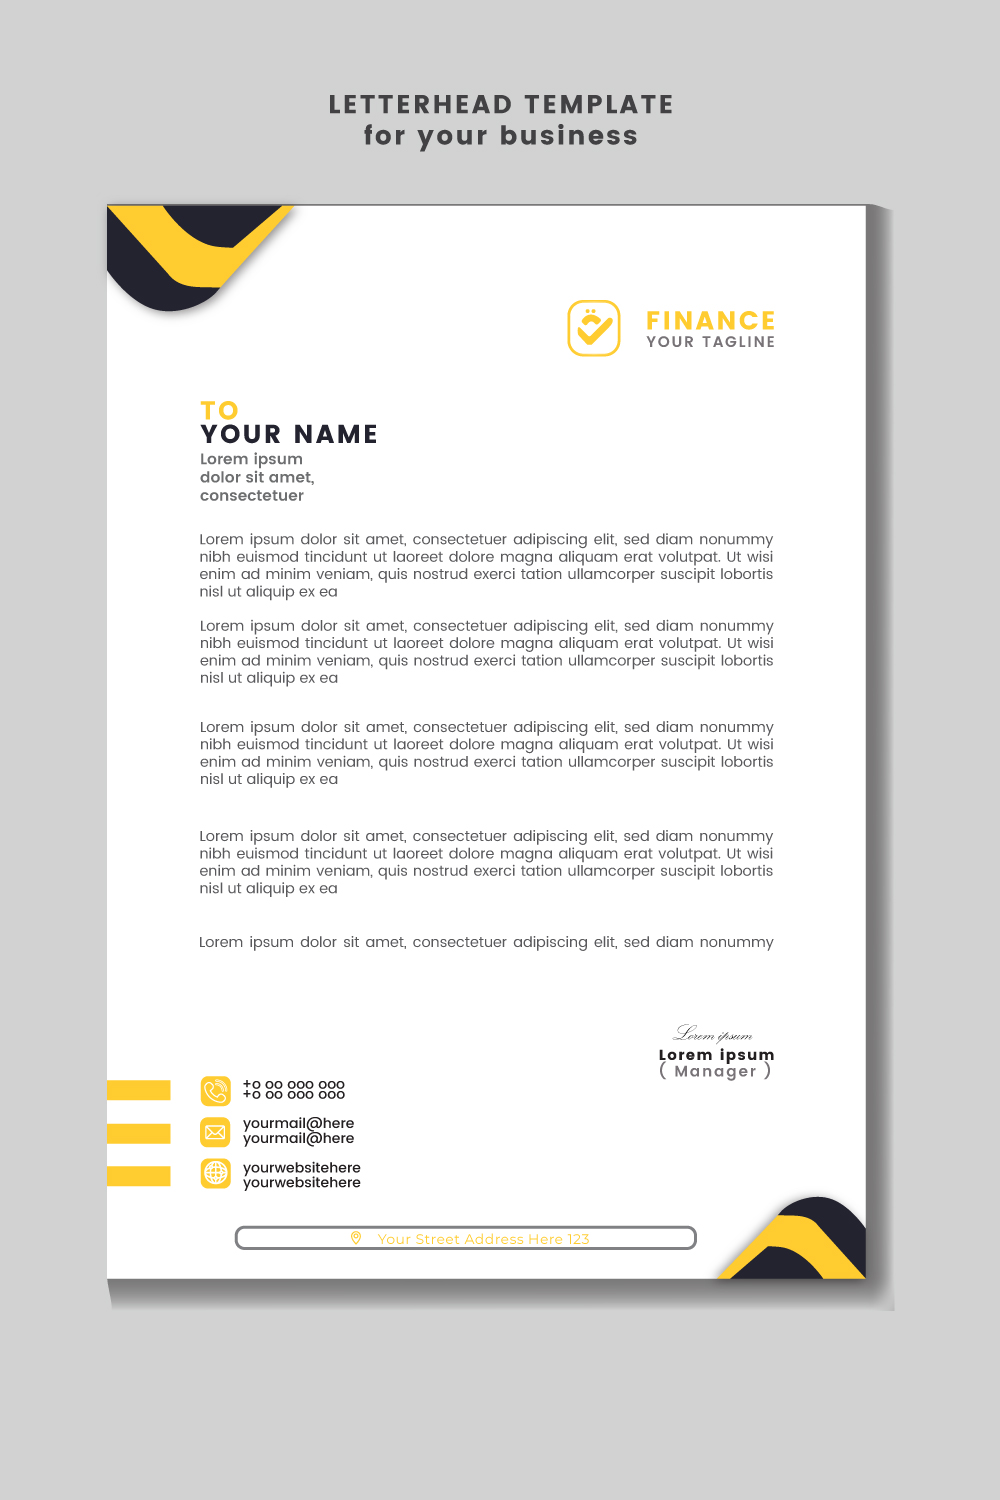 A4 size Letterhead template for your business Flyer Design Template stock illustration pinterest preview image.